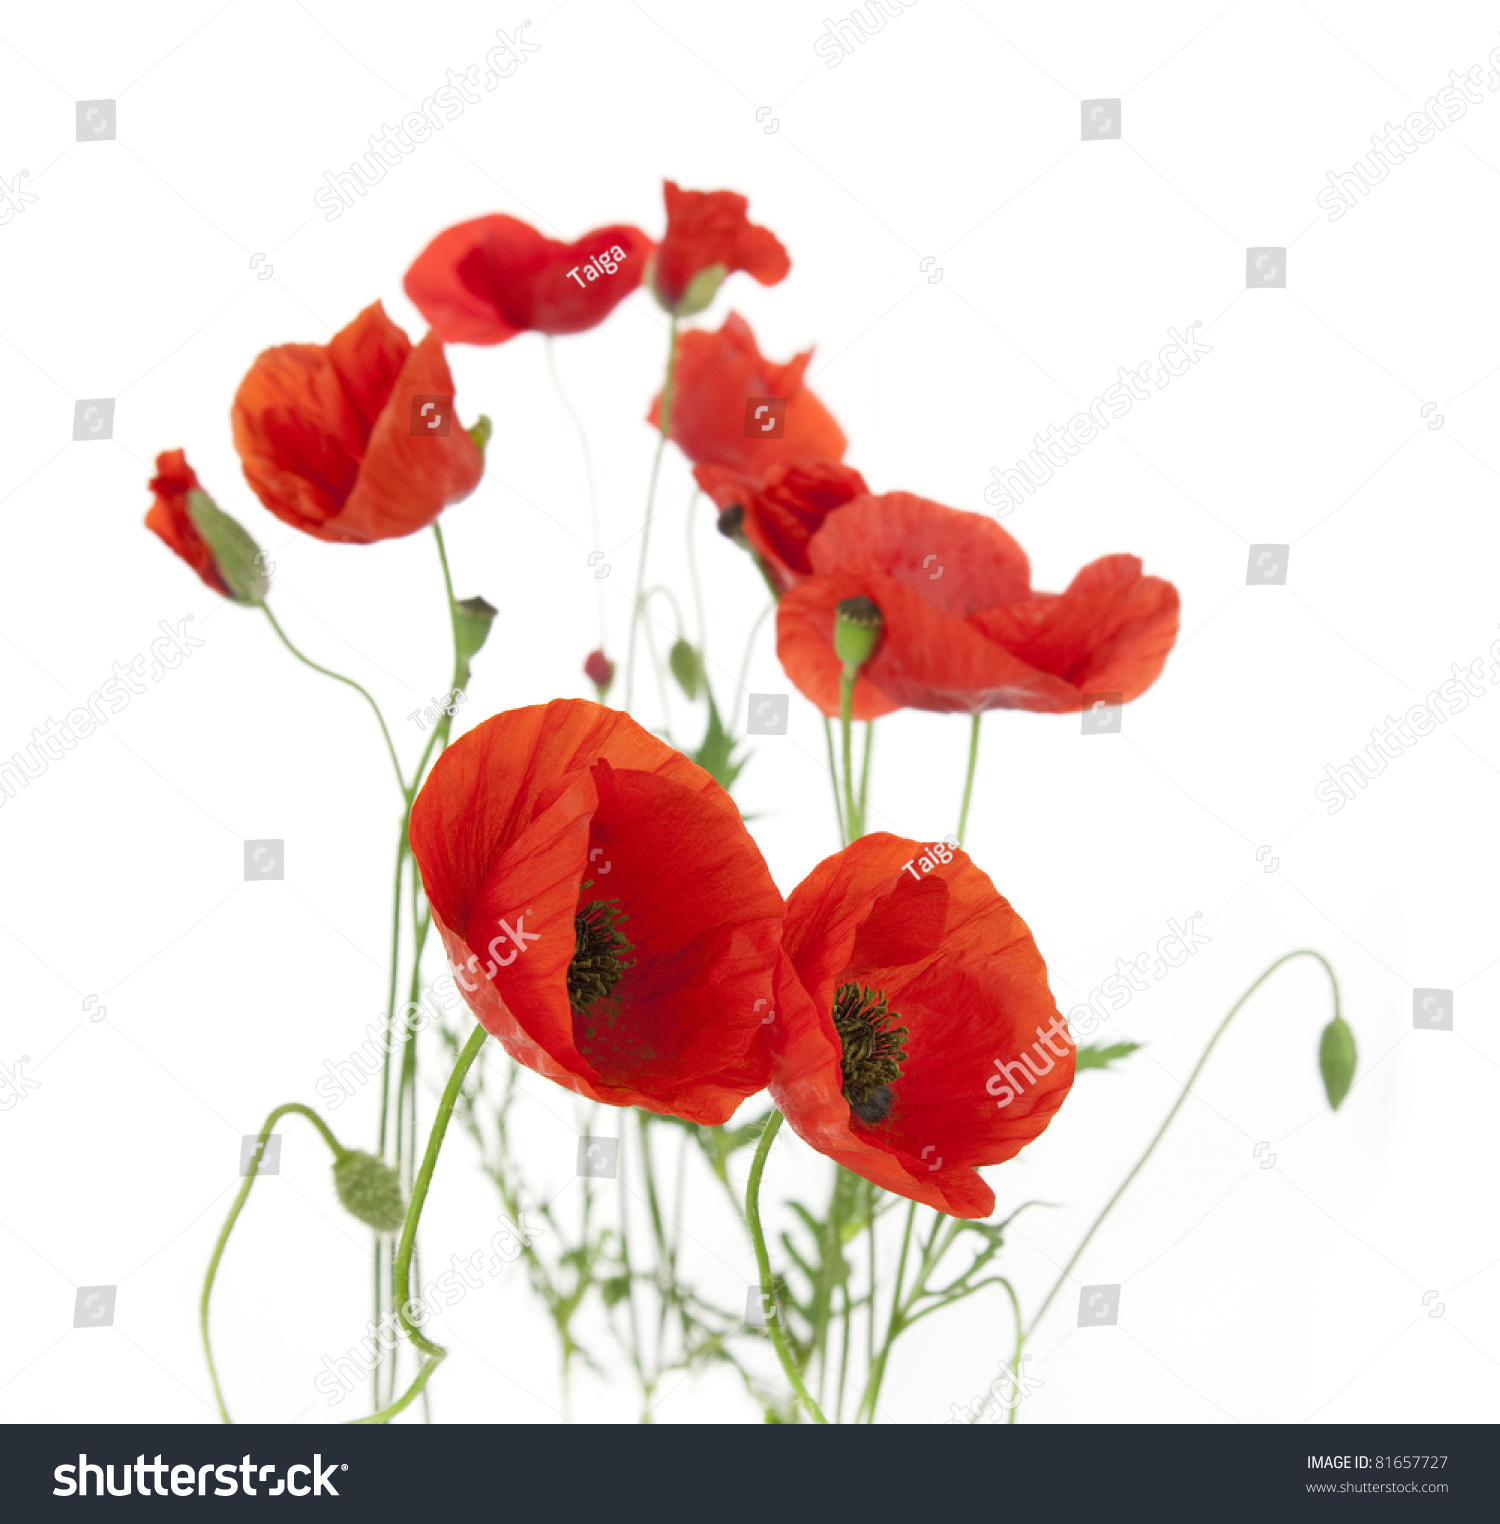 Natural Fresh Poppies Isolated On White Stock Photo 81657727 ...